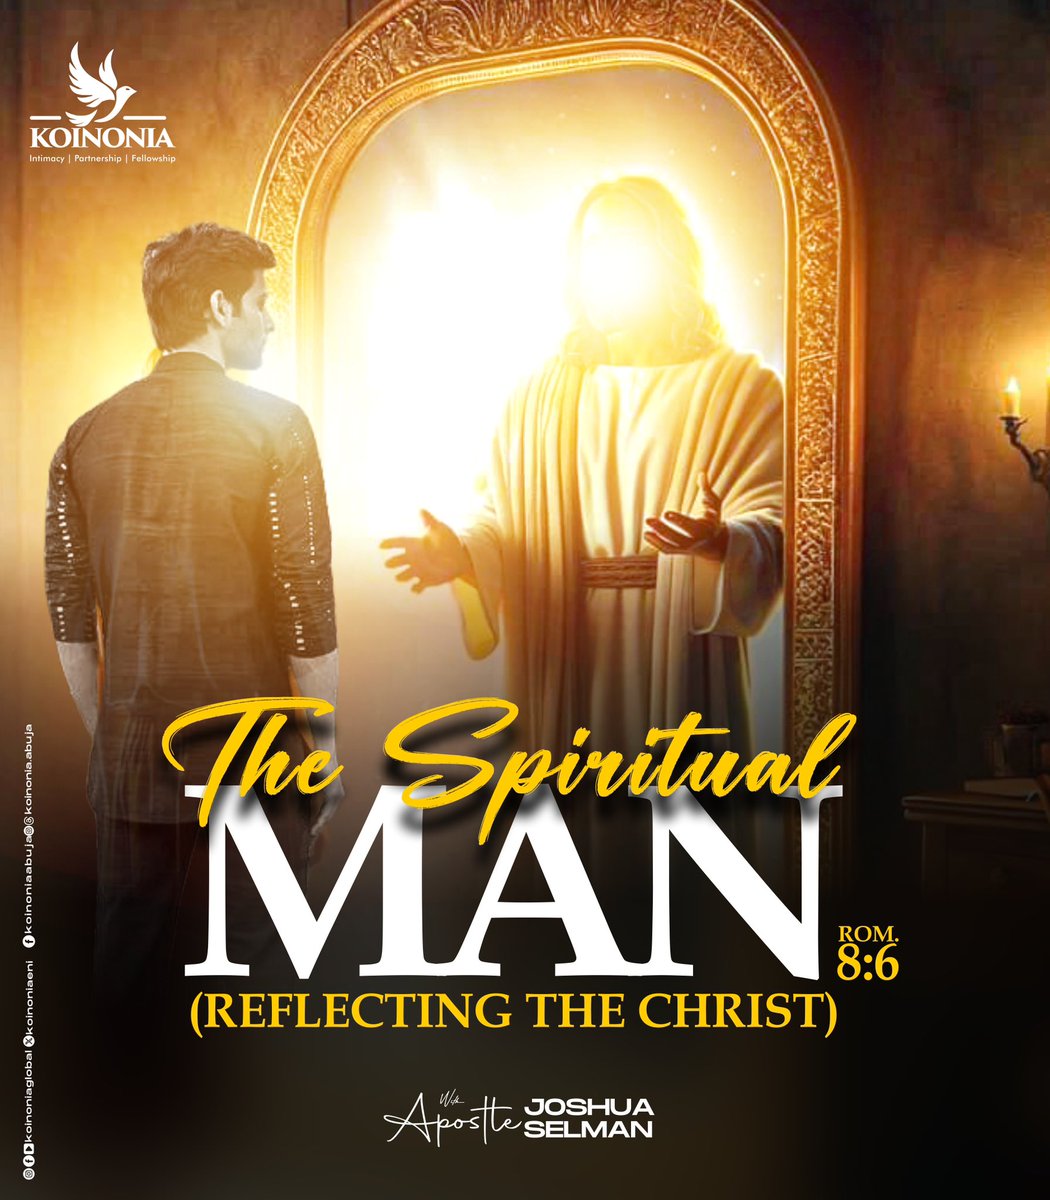 Dear Beloved, kindly click on the link below to download the audio message of “THE SPIRITUAL MAN (REFLECTING THE CHRIST)“ WITH APOSTLE JOSHUA SELMAN. drive.google.com/file/d/1A3GppI… #ApostleJoshuaSelman #TheSpiritualMan #ReflectingTheChrist #JesusRevealedJesusGlorified #ThisIsKoinonia